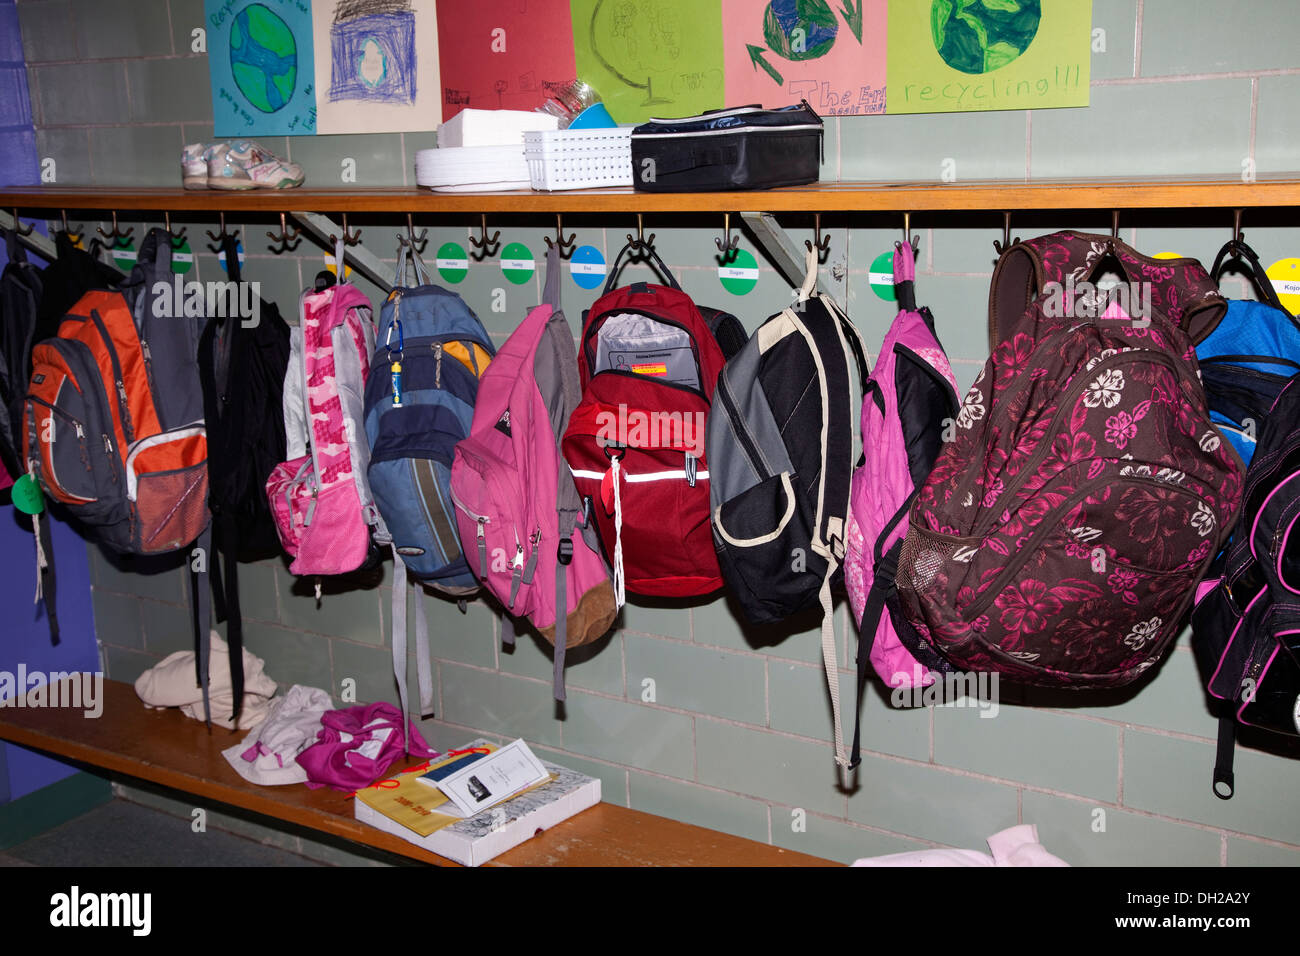 Children's colorful backpacks hanging in a row on hooks. Horace Mann Elementary School St Paul Minnesota MN USA Stock Photo